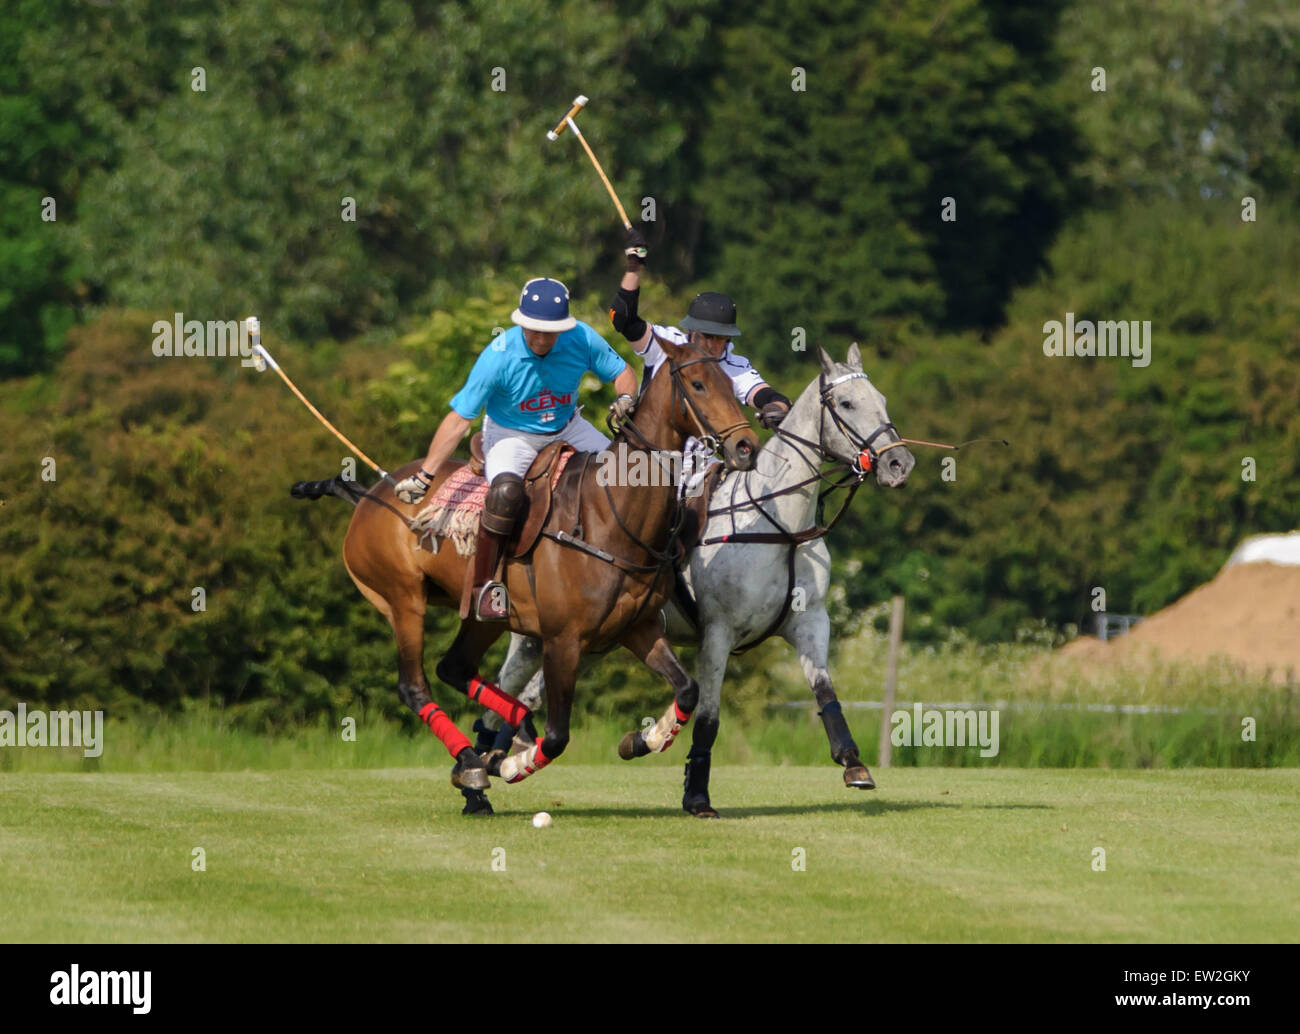 Rutland Polo Club, Oakham,16th June 2015. Rathbeags vs. Print On Demand during the league matches for the Assam Cup. Stock Photo